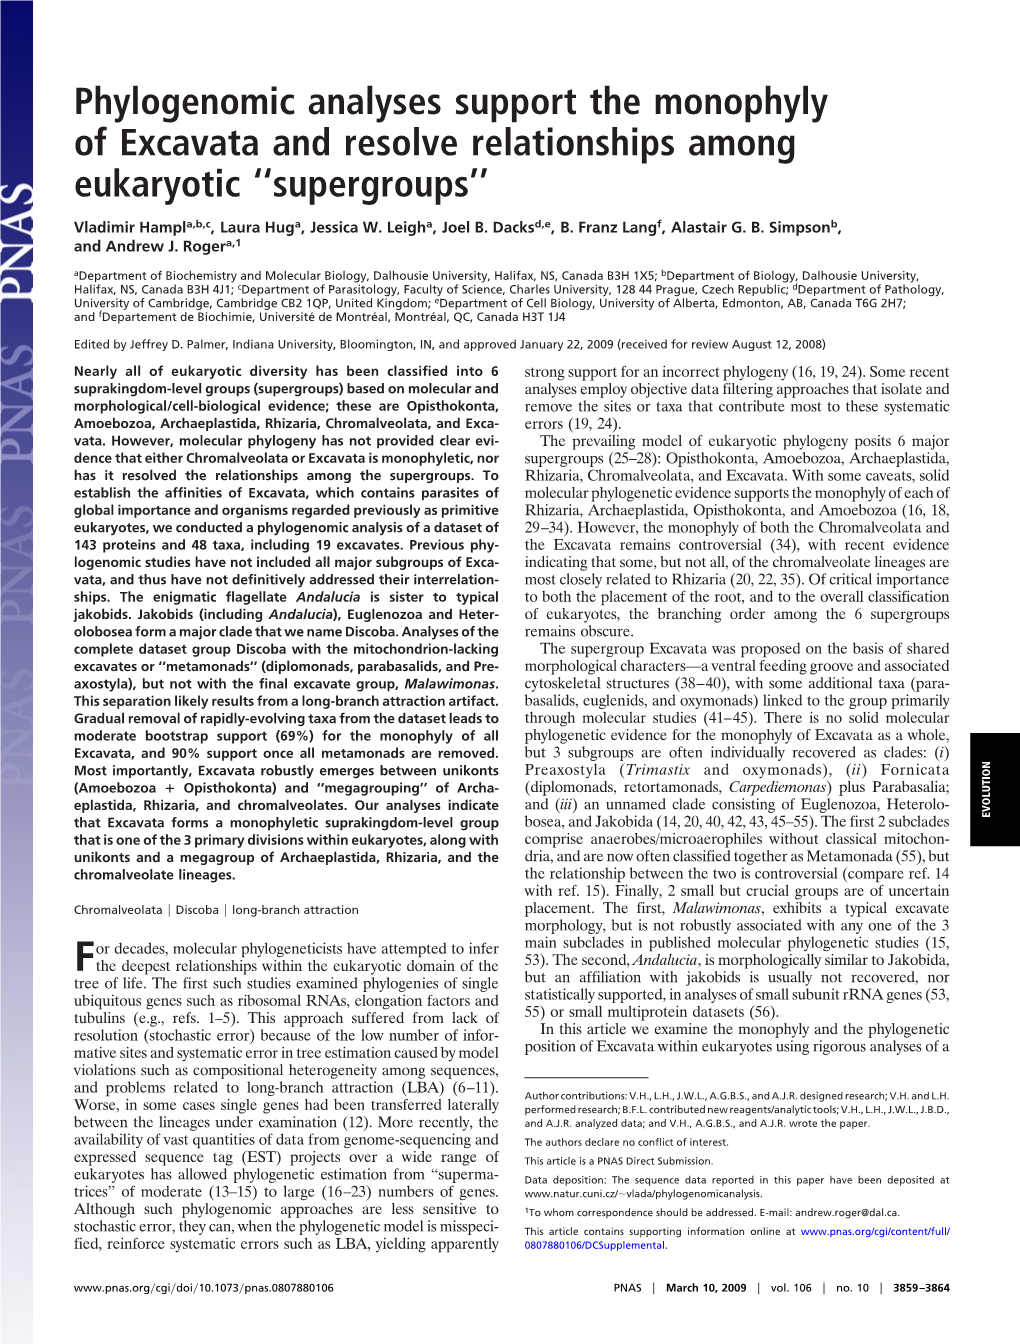 Phylogenomic Analyses Support the Monophyly of Excavata and Resolve Relationships Among Eukaryotic ‘‘Supergroups’’